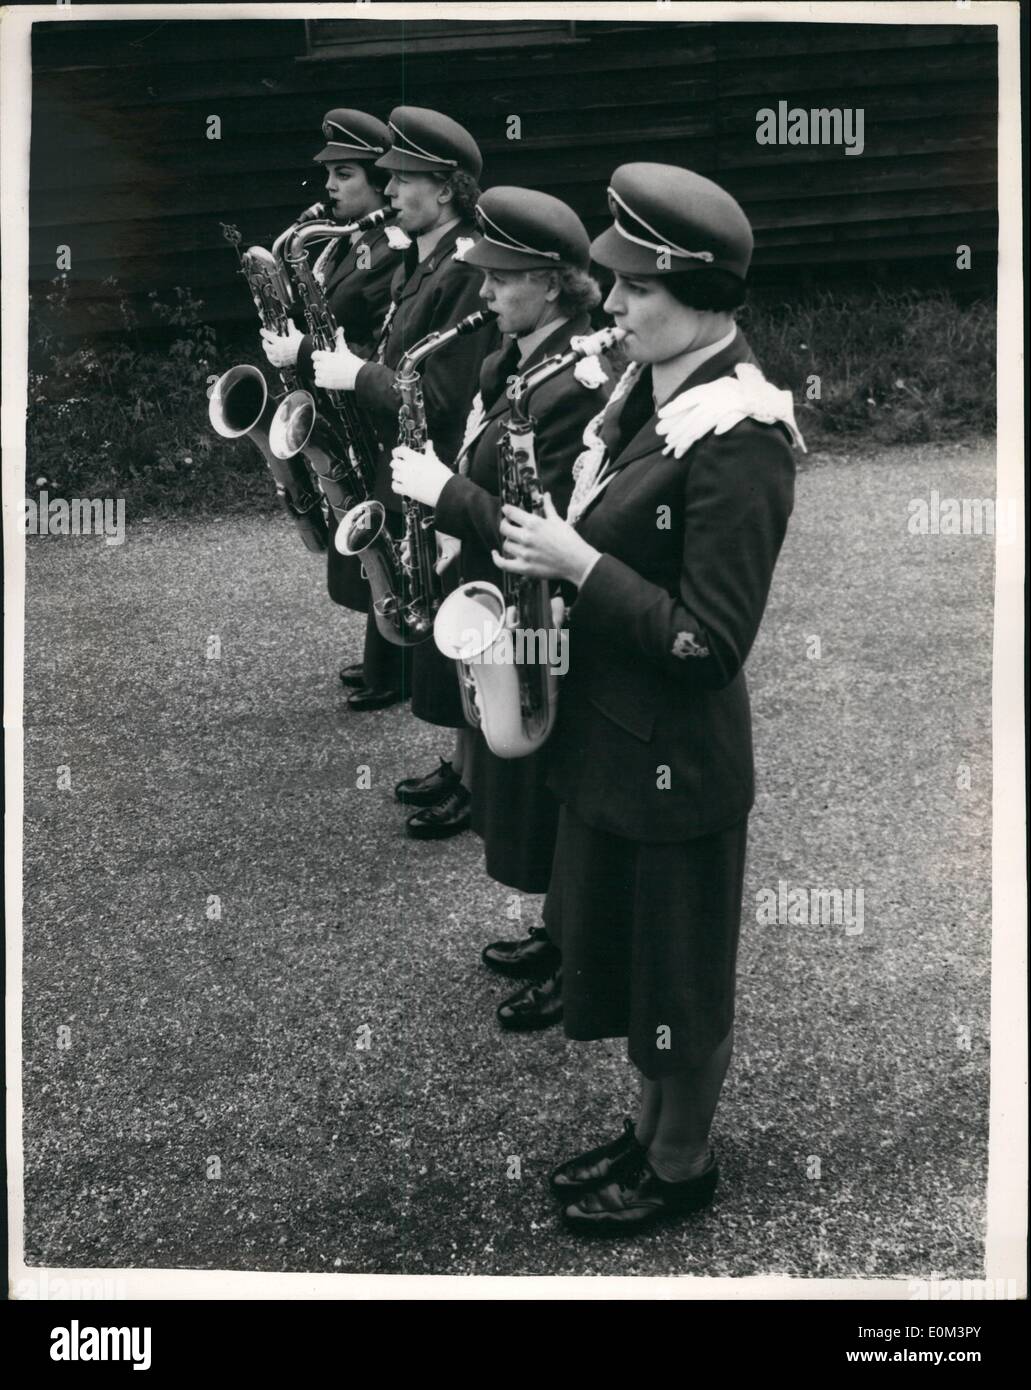 May 05, 1953 - WRAF Band Prepares For Royal Tournament: Members of the WRAF band are practicing at the Uxbridge headquarters, for the Royal Tournament. Photo Shows: WRAF saxophonists seen at practice at Uxbridge. (L to R): Lacw, V. Evans, Eaw, E. Harris, Sacw, S. Moulson, and Lacw, J. Marples. Stock Photo